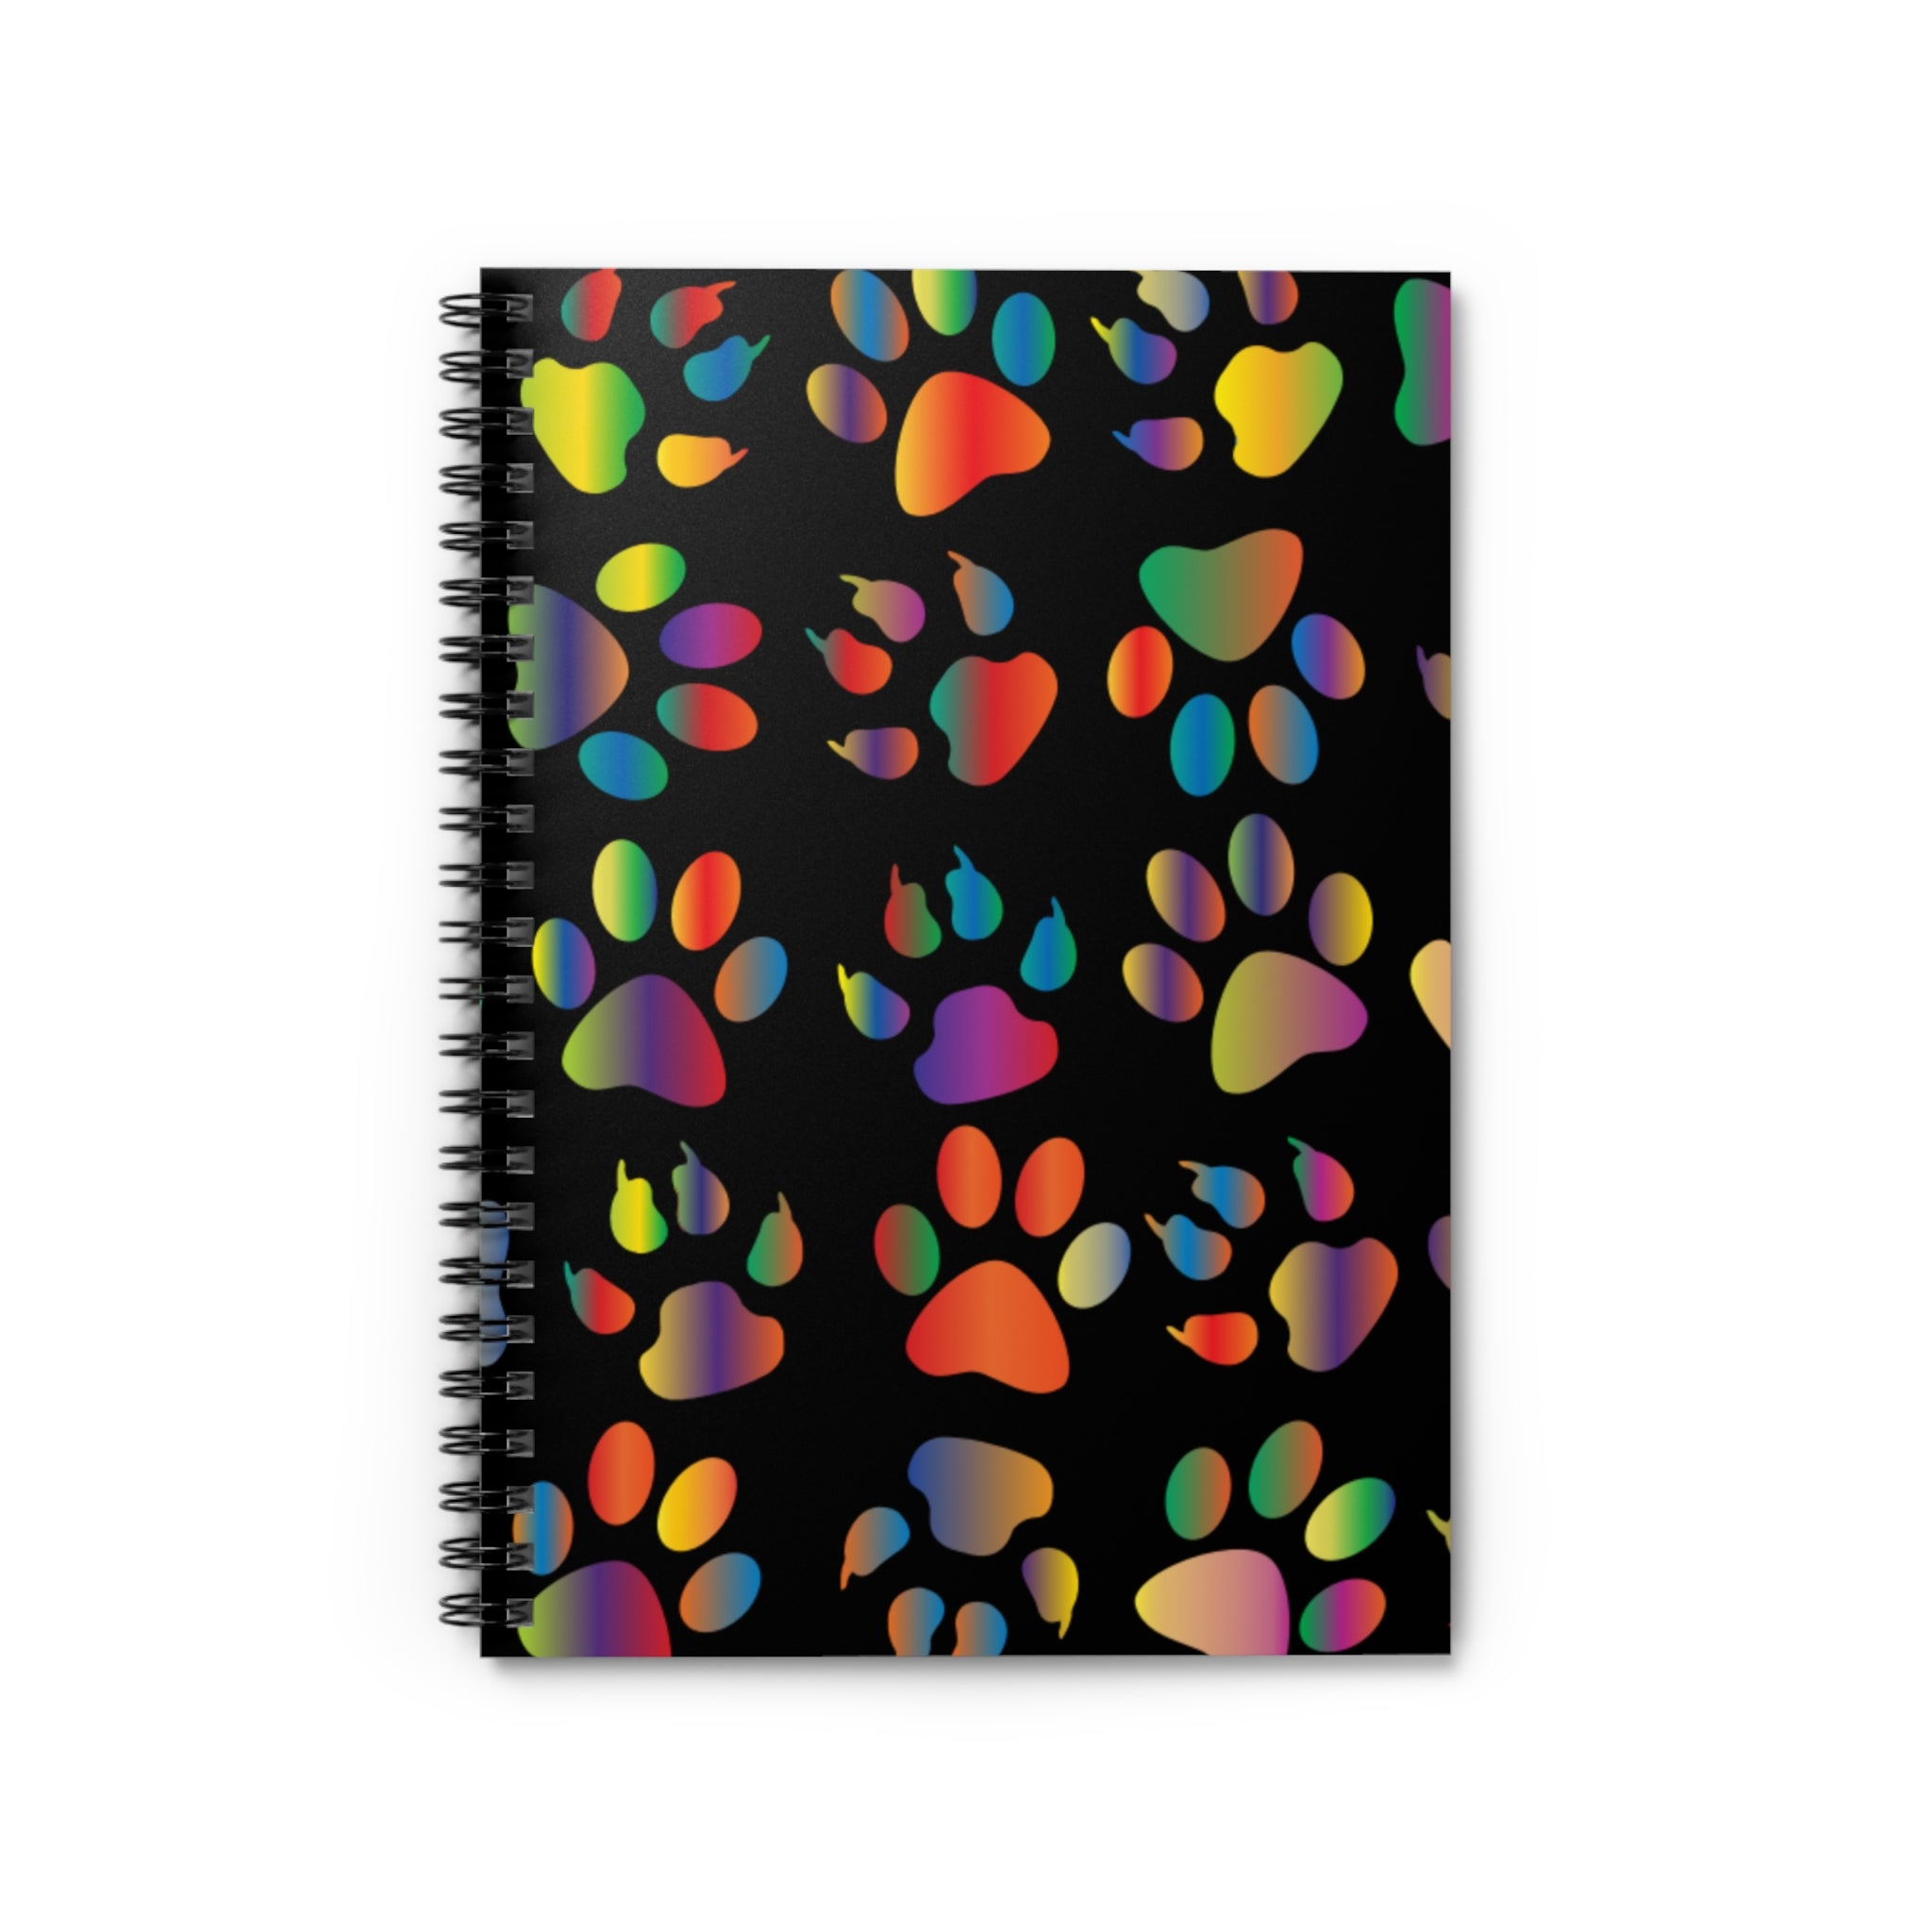 Paws and Claws Spiral Lined Notebook